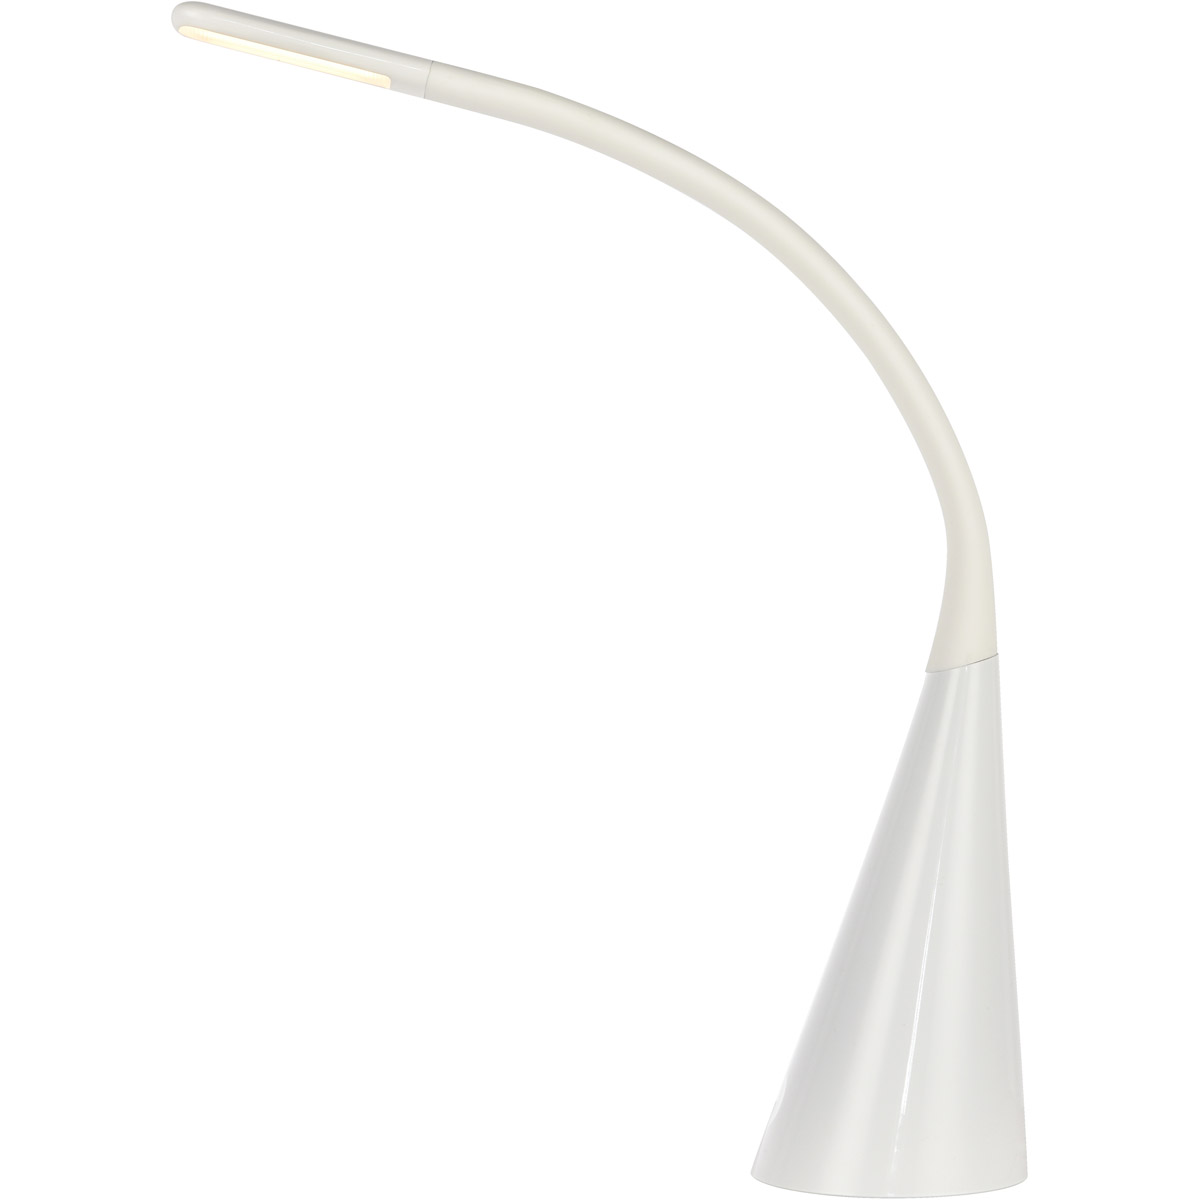 Ledds004 Sleek Led Desk Lamp With Smooth Touch Dimmer & Usb, Glossywhite